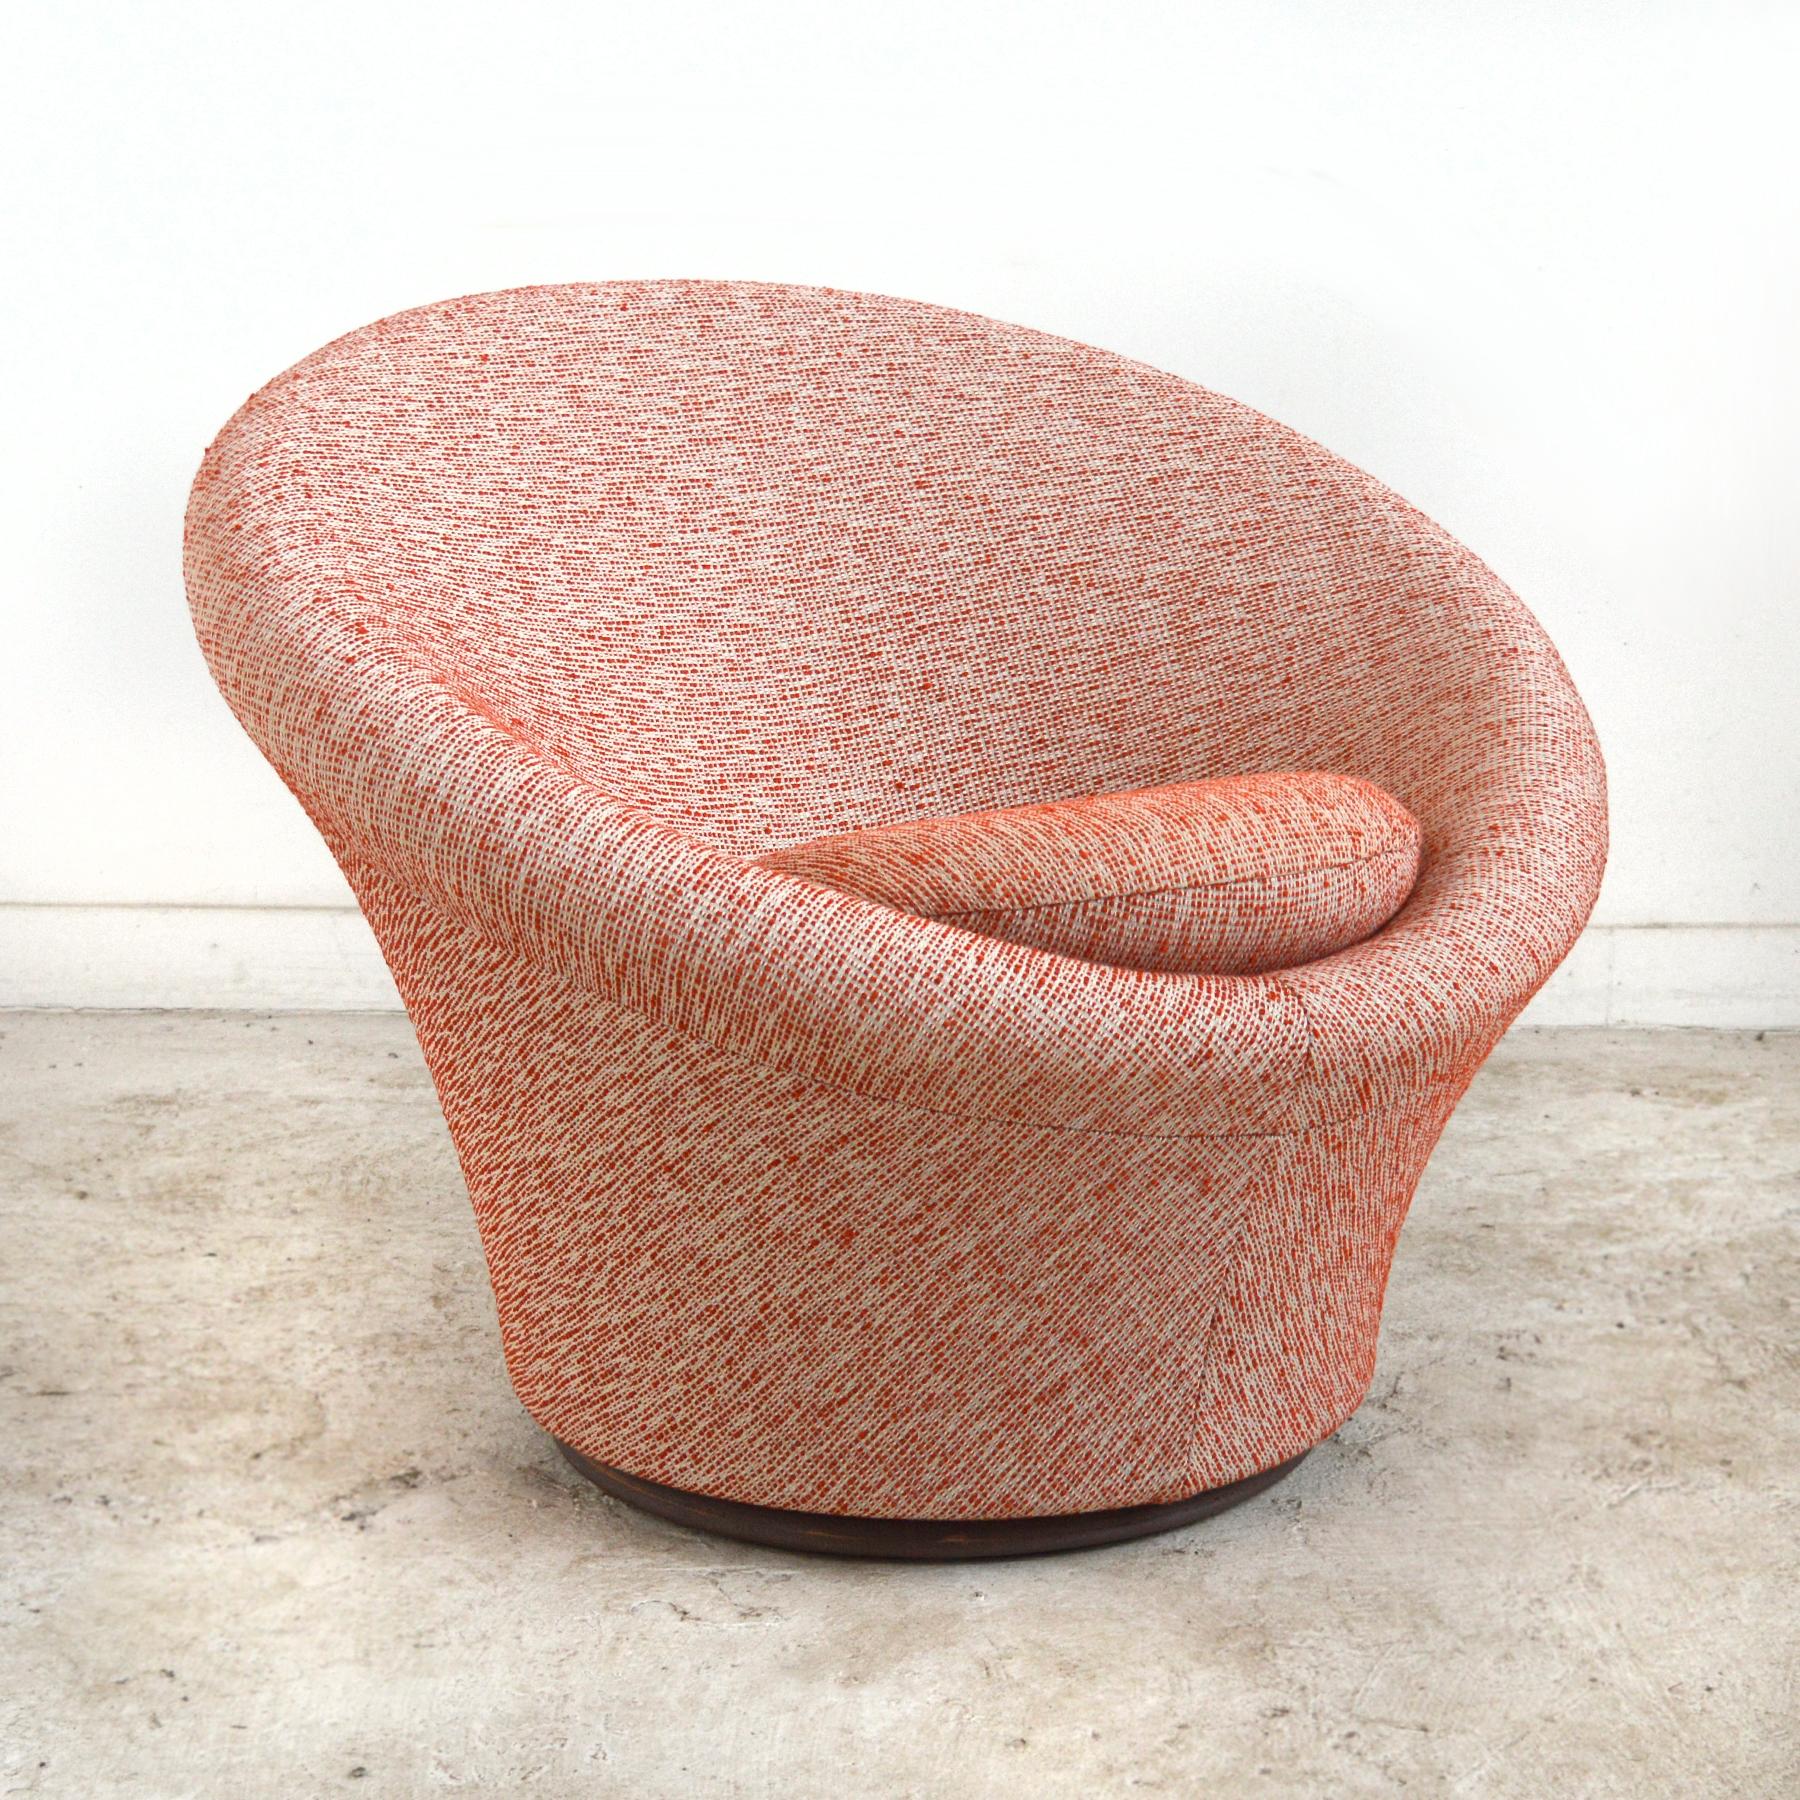 A terrific example of Paulin's organic design aesthetic, the mushroom chair sprouts from the floor and envelops the sitter. The curvy form looks beautiful from every side and has a swivel function, allowing it to easily be positioned to any angle.